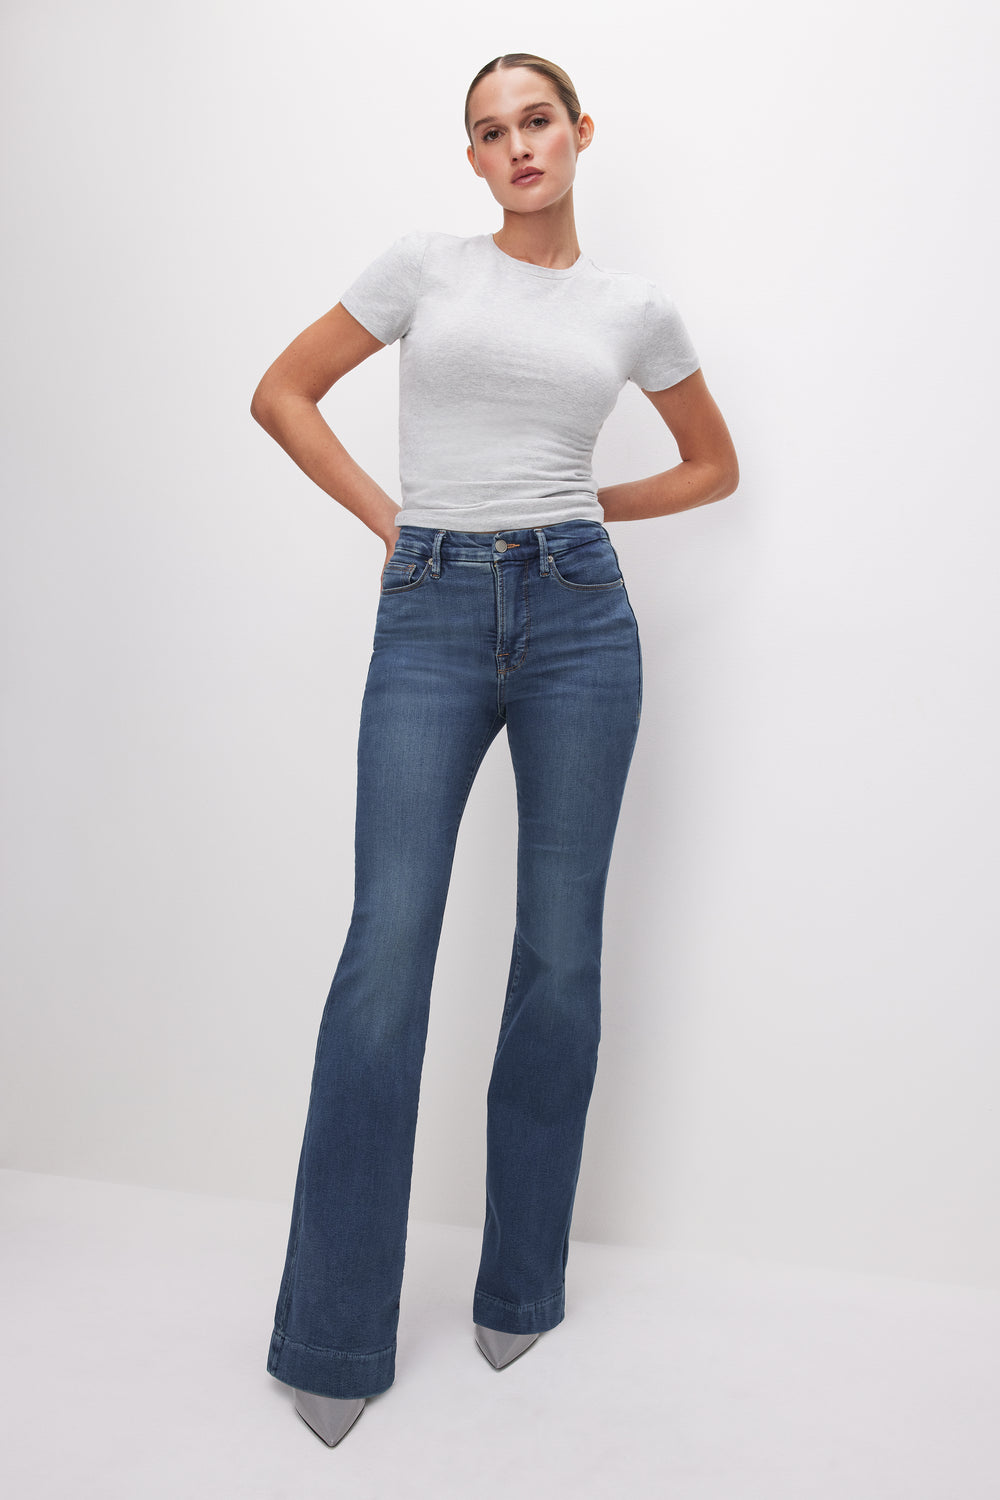 Women's Mid Rise Jeans - GOOD AMERICAN